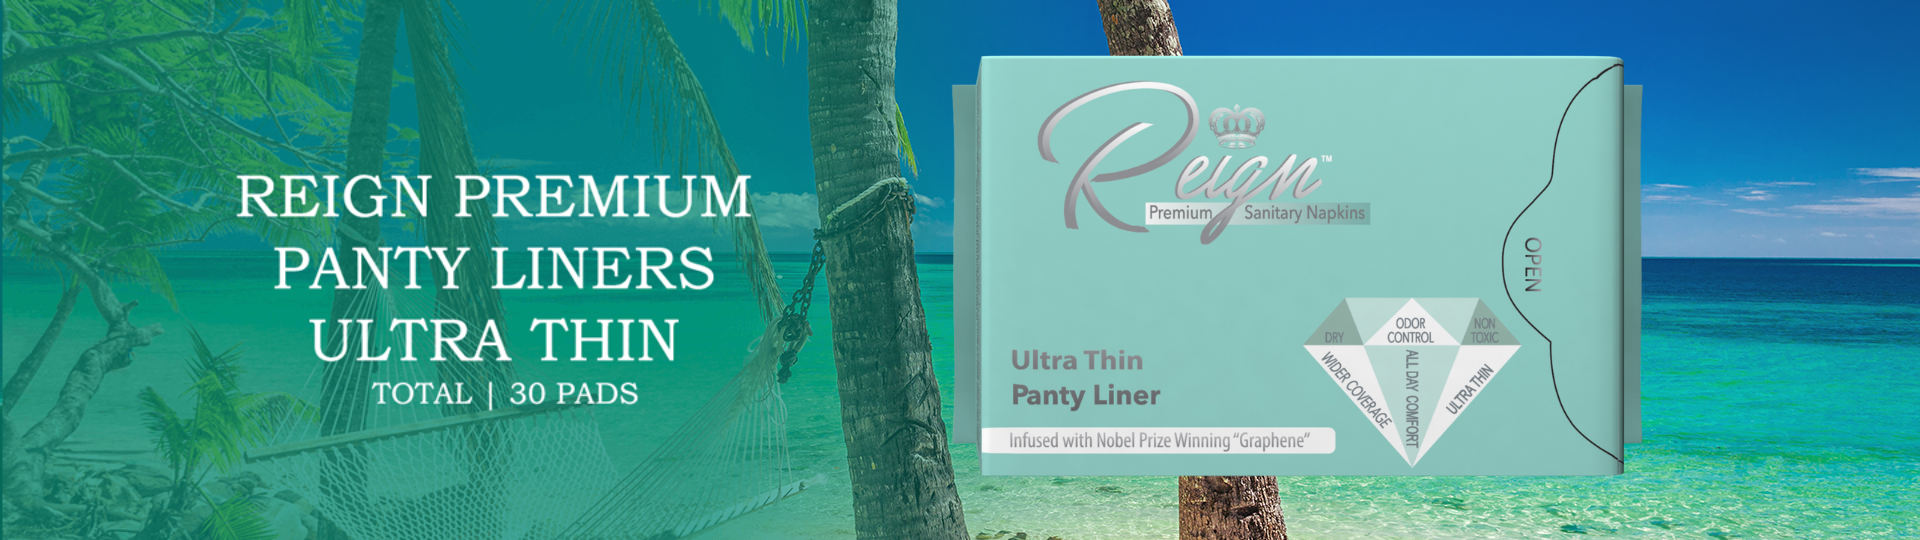 reign-pads-panty-liners-beach-header-1920x540